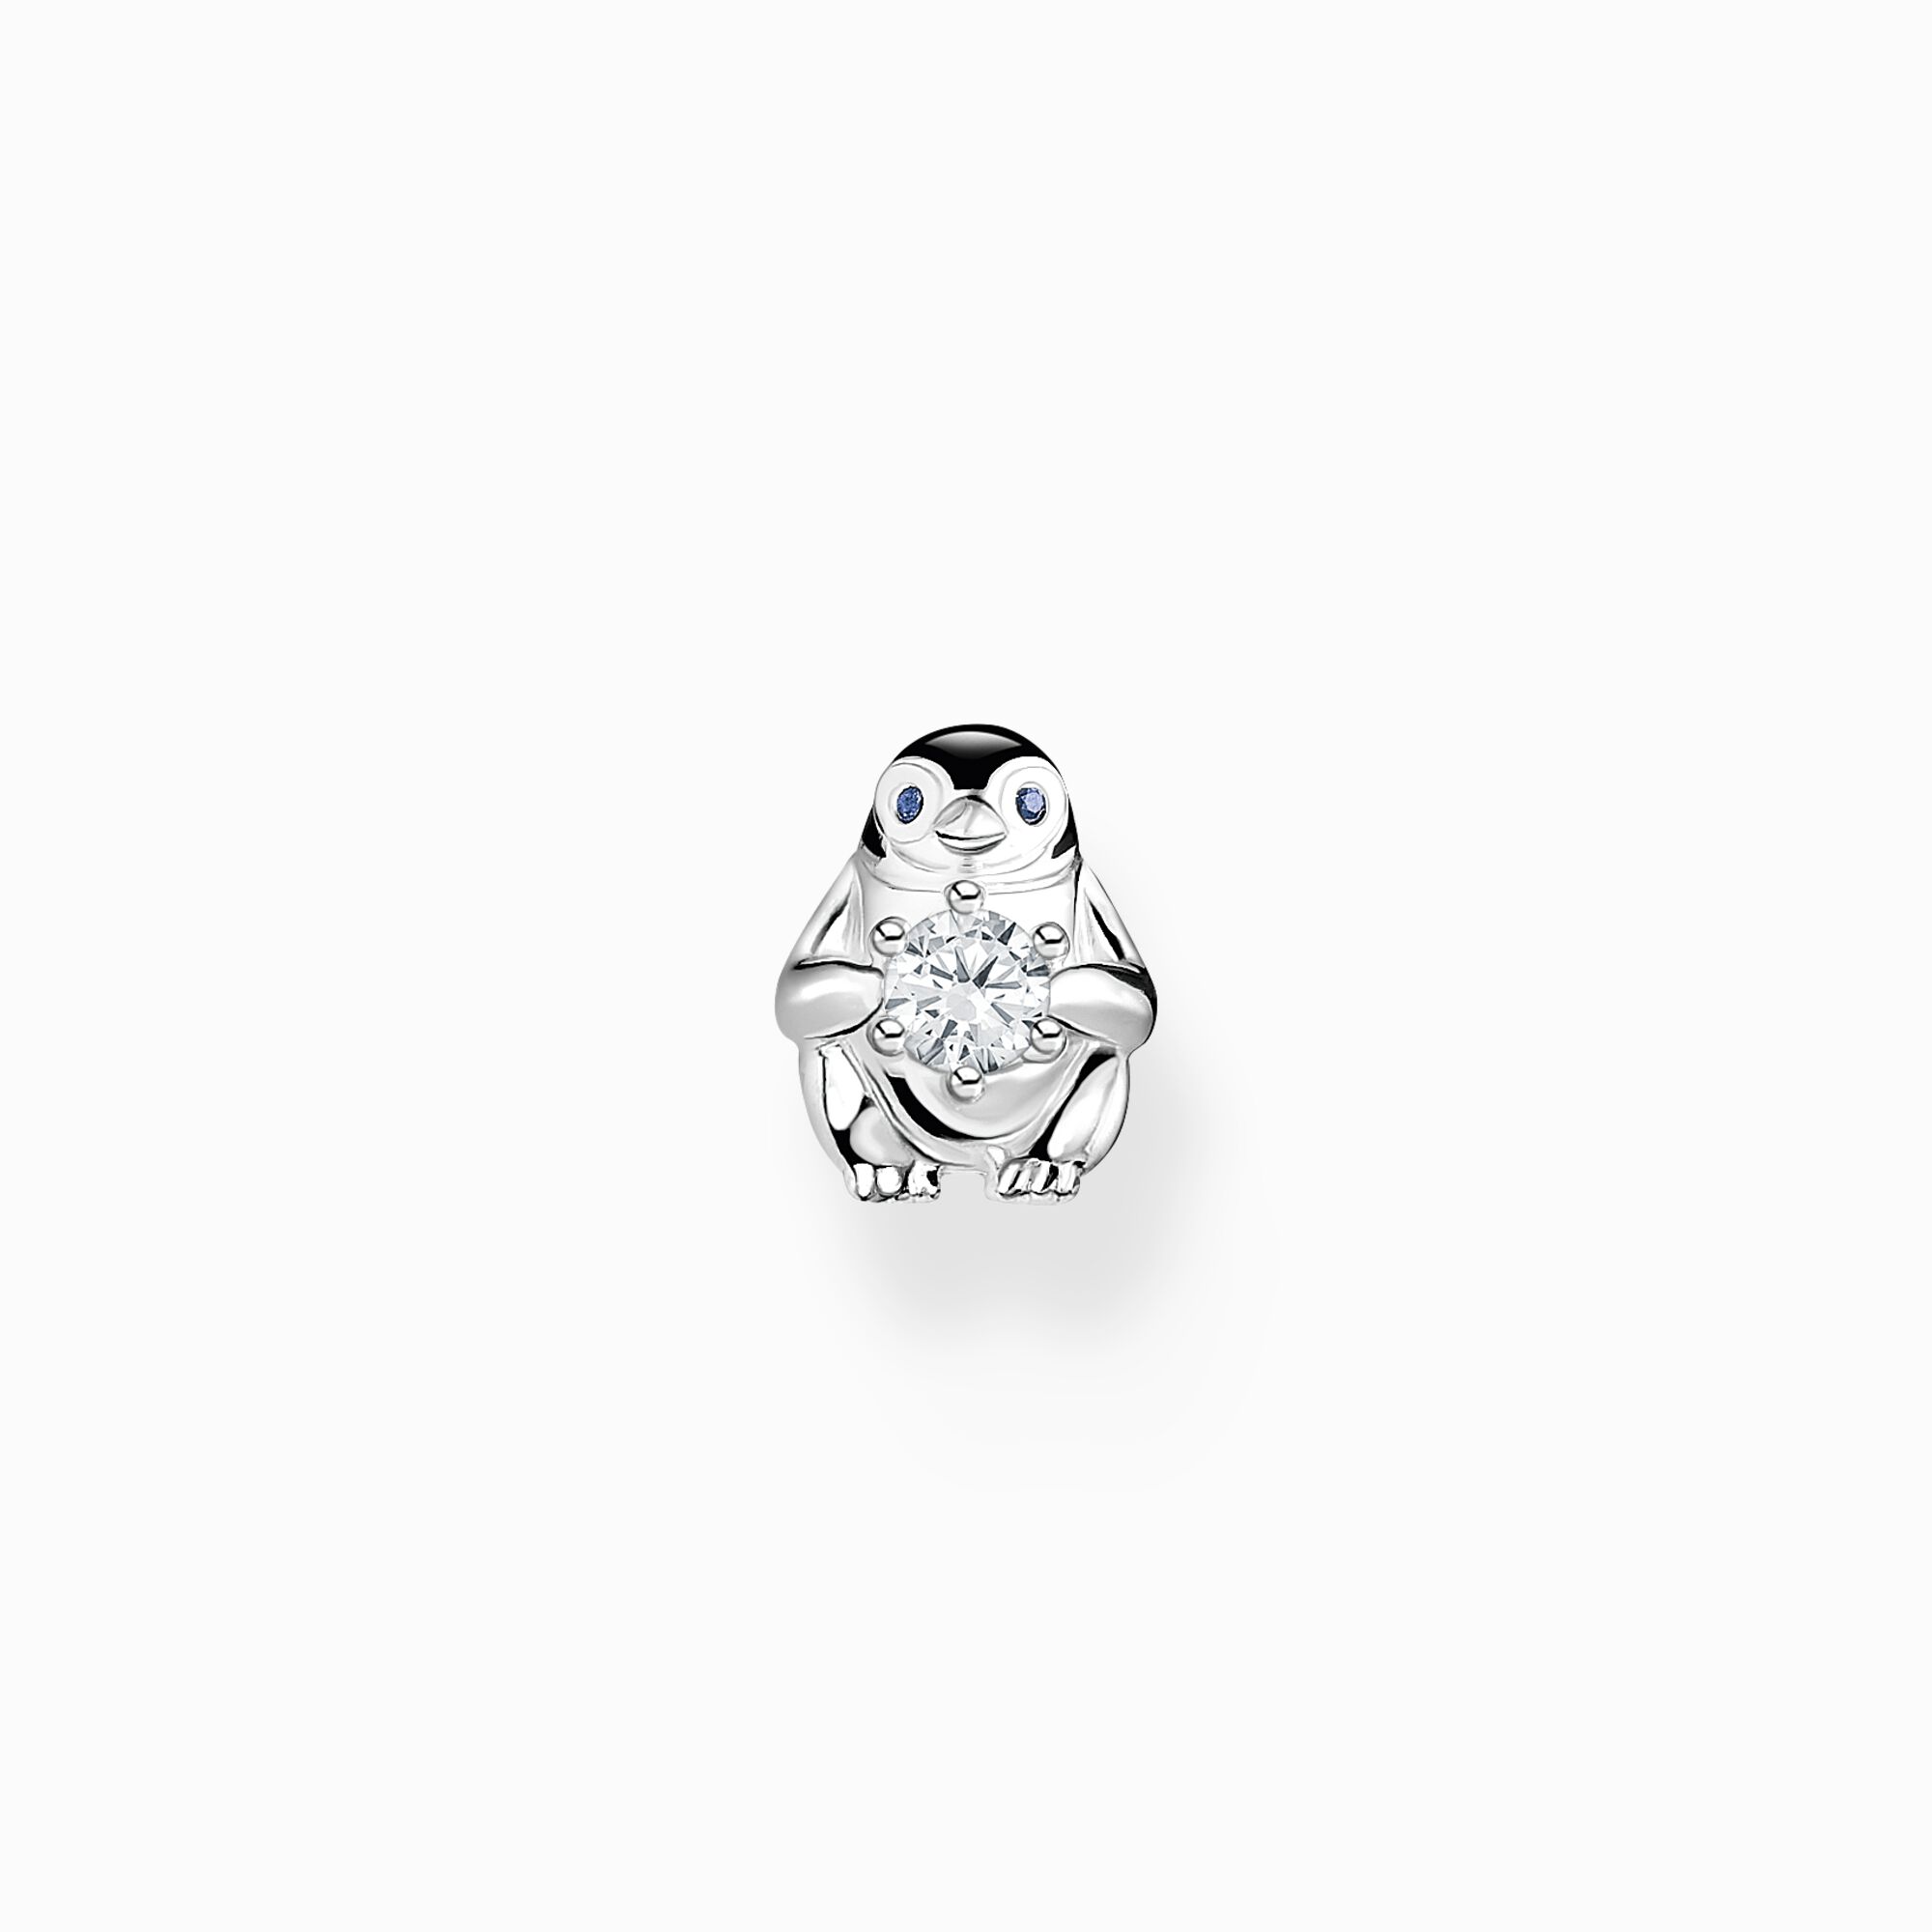 Single ear stud penguin with white stone silver from the Charming Collection collection in the THOMAS SABO online store